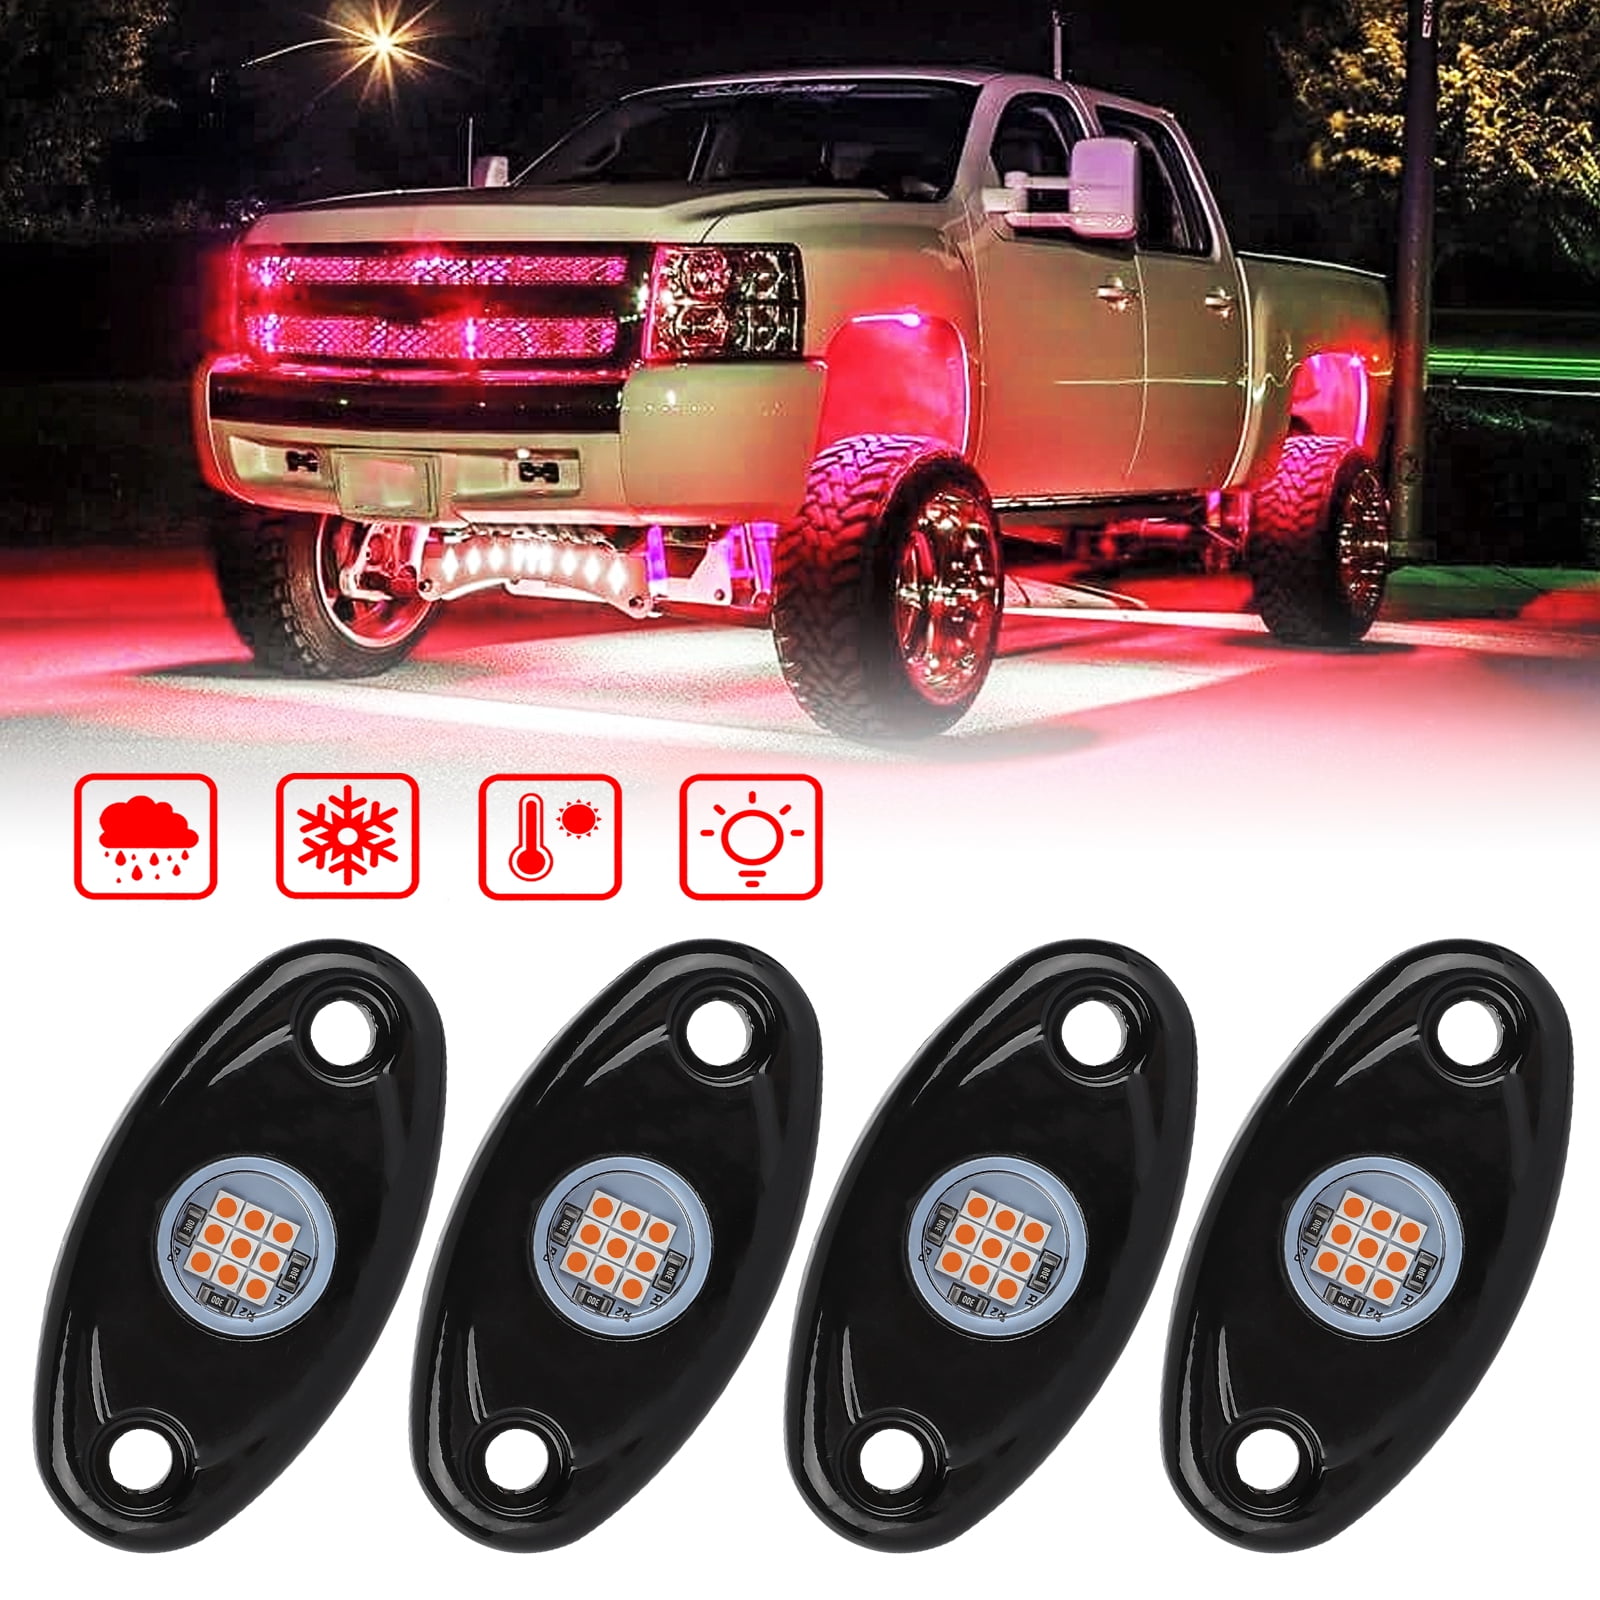 LY8 4 Pods LED Rock Lights Green Waterproof underglow LED Neon Underbody Fender Lights for Jeep Off Road Truck Car ATV SUV Boat Under Body Glow LED Lighting Lamp 